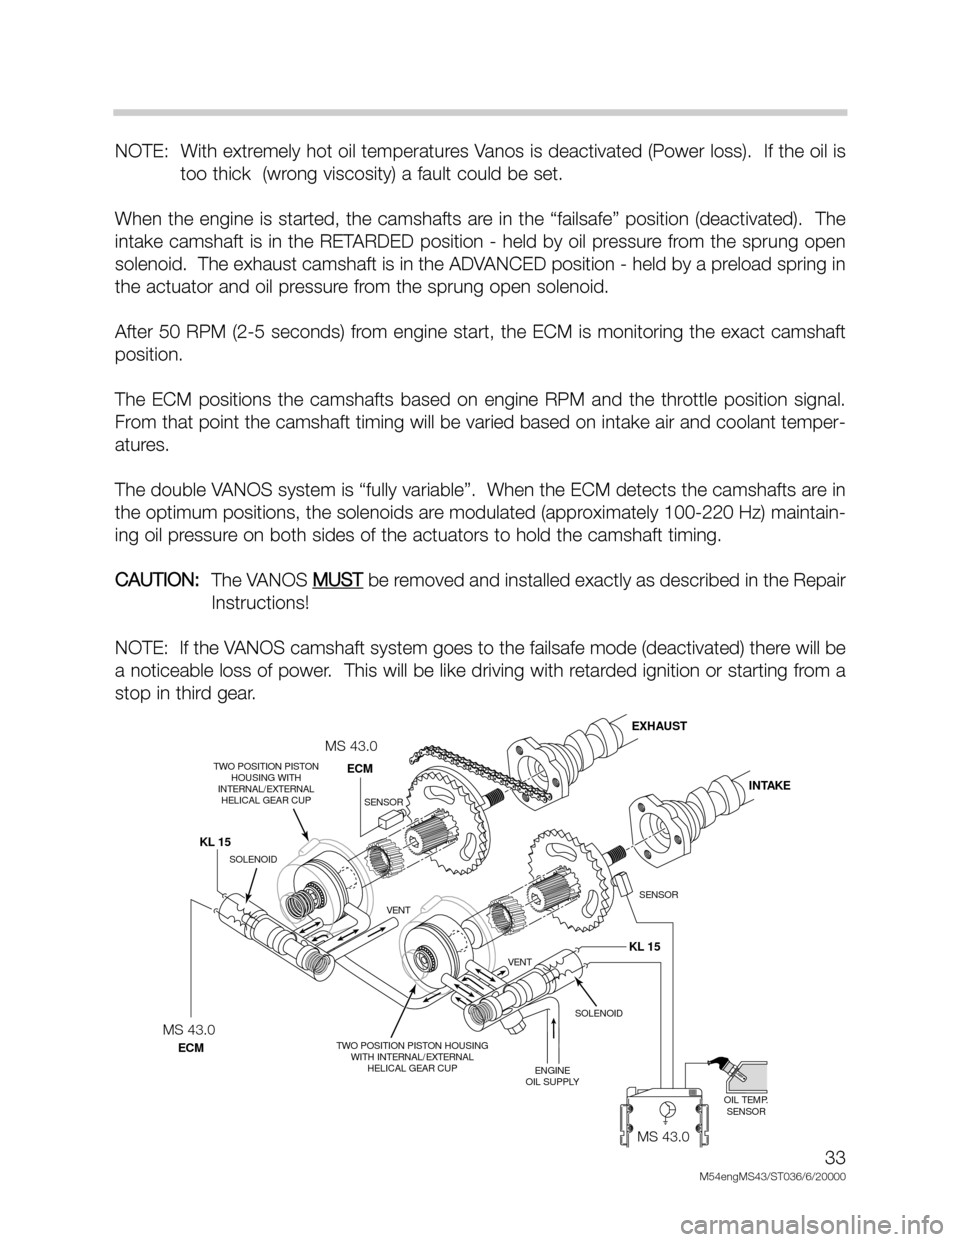 BMW X5 1999 E53 M54 Engine Workshop Manual 33
M54engMS43/ST036/6/20000
NOTE:  With extremely hot oil temperatures Vanos is deactivated (Power loss).  If the oil is
too thick  (wrong viscosity) a fault could be set.
When the engine is started, 